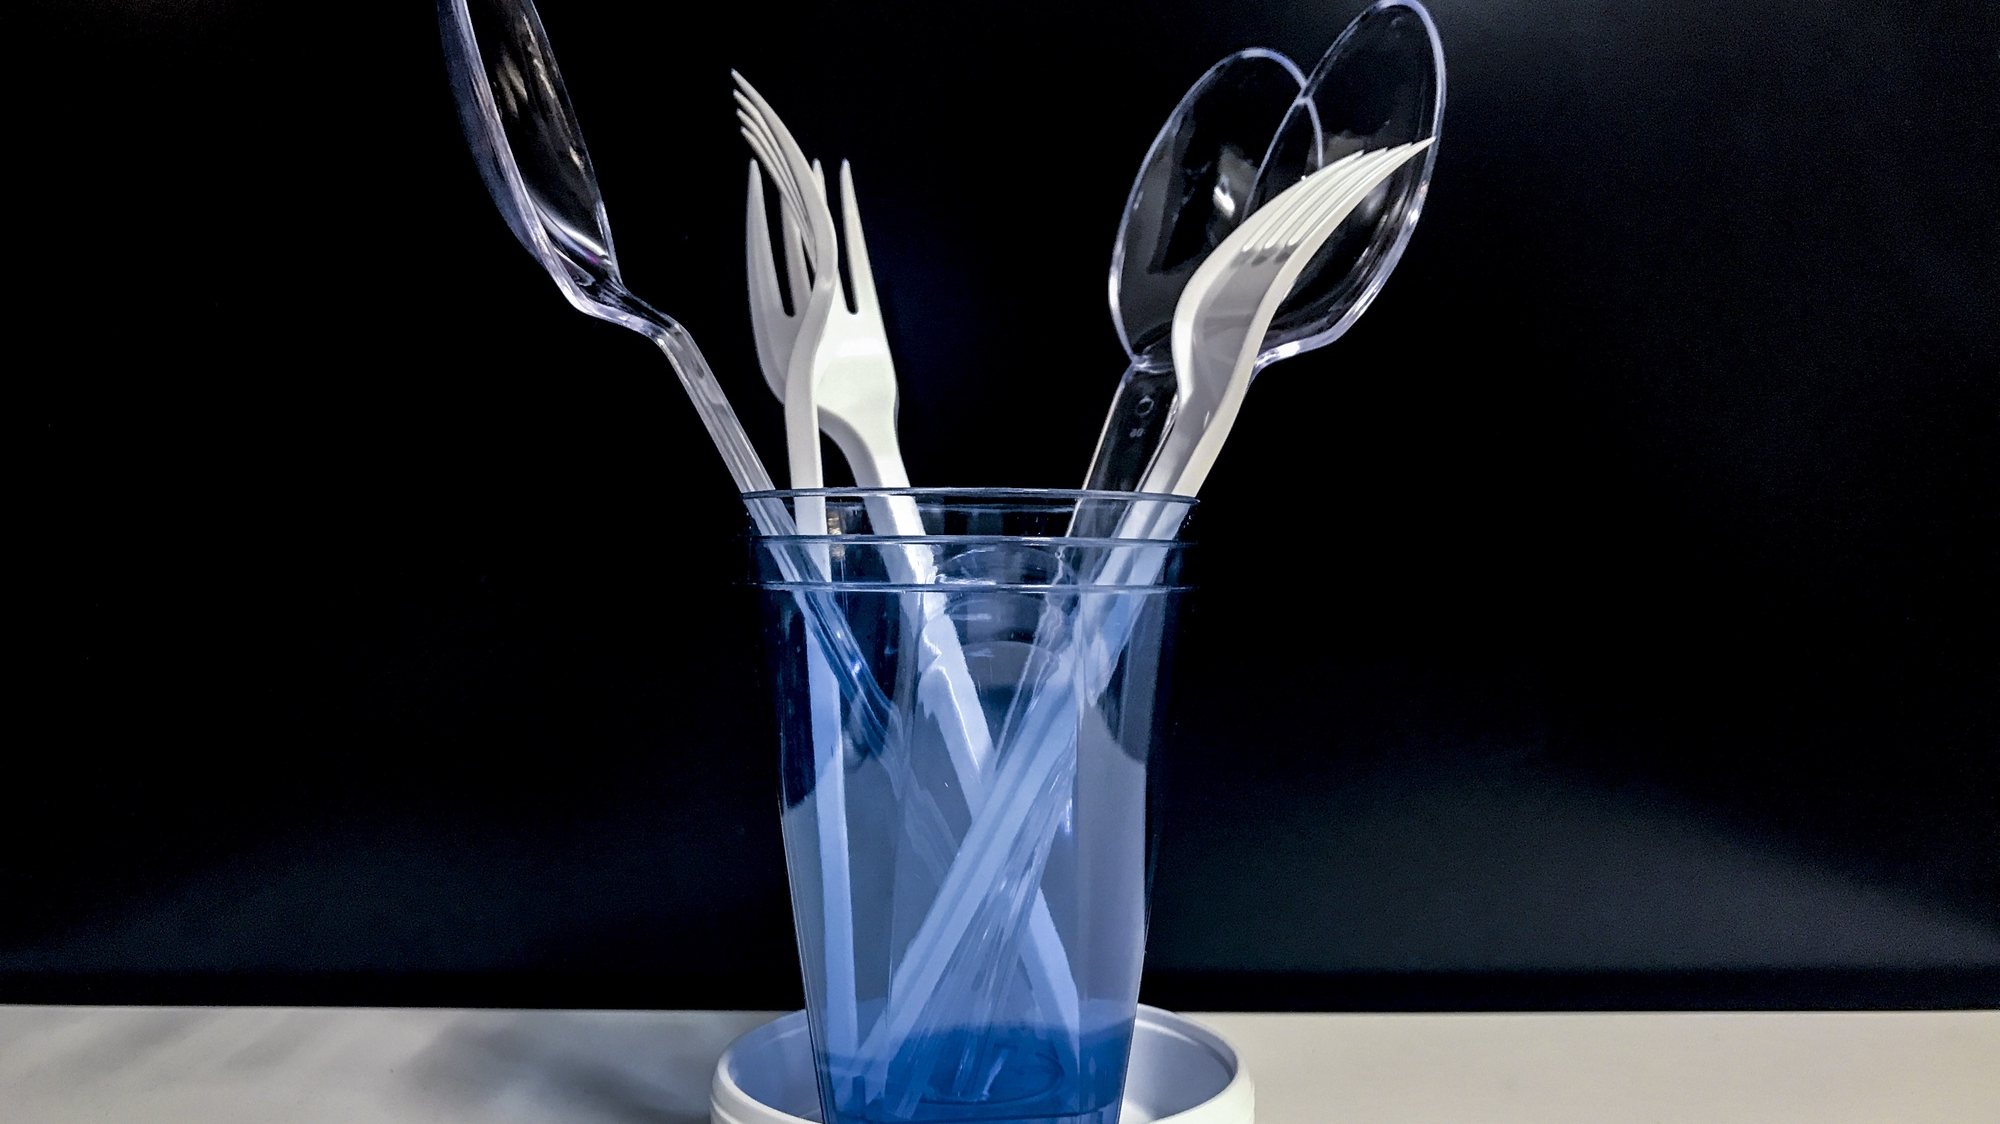 epa07240131 An illustration picture shows plastic spoons and forks placed in a plactic cup, in Oslo, Norway, 19 December 2018, in relation to the EU ban regulations on single use only plastic products. Single-use plastic items such as straws and polystyrene cups will be banned in the European Union by 2021, EU officials agreed late 18 December, as they passed measures to cut plastic use in a bid to reduce marine litter.  EPA/STIAN LYSBERG SOLUM NORWAY OUT